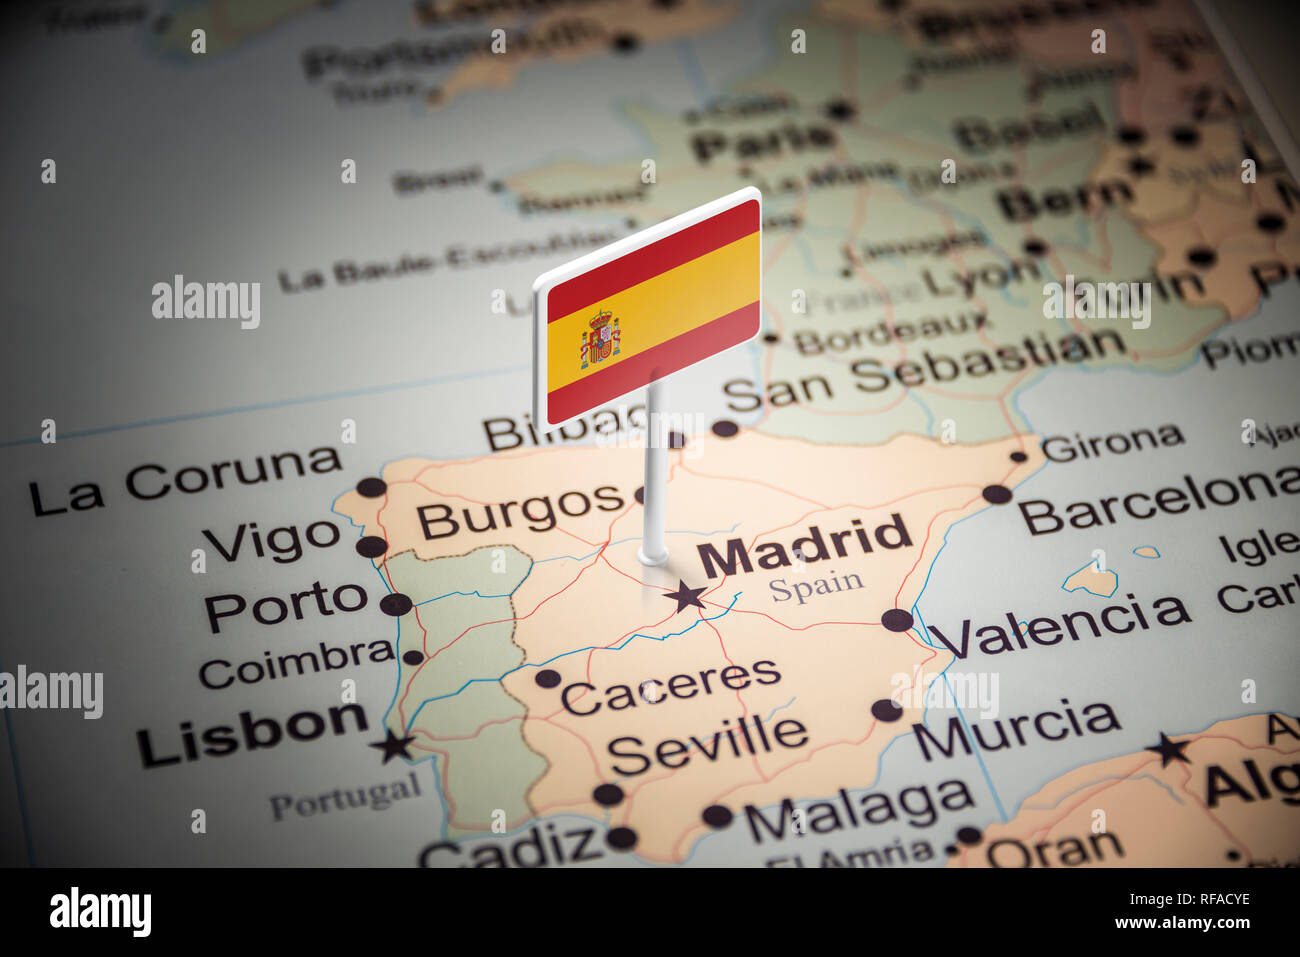 spain marked with a flag on the map Stock Photo